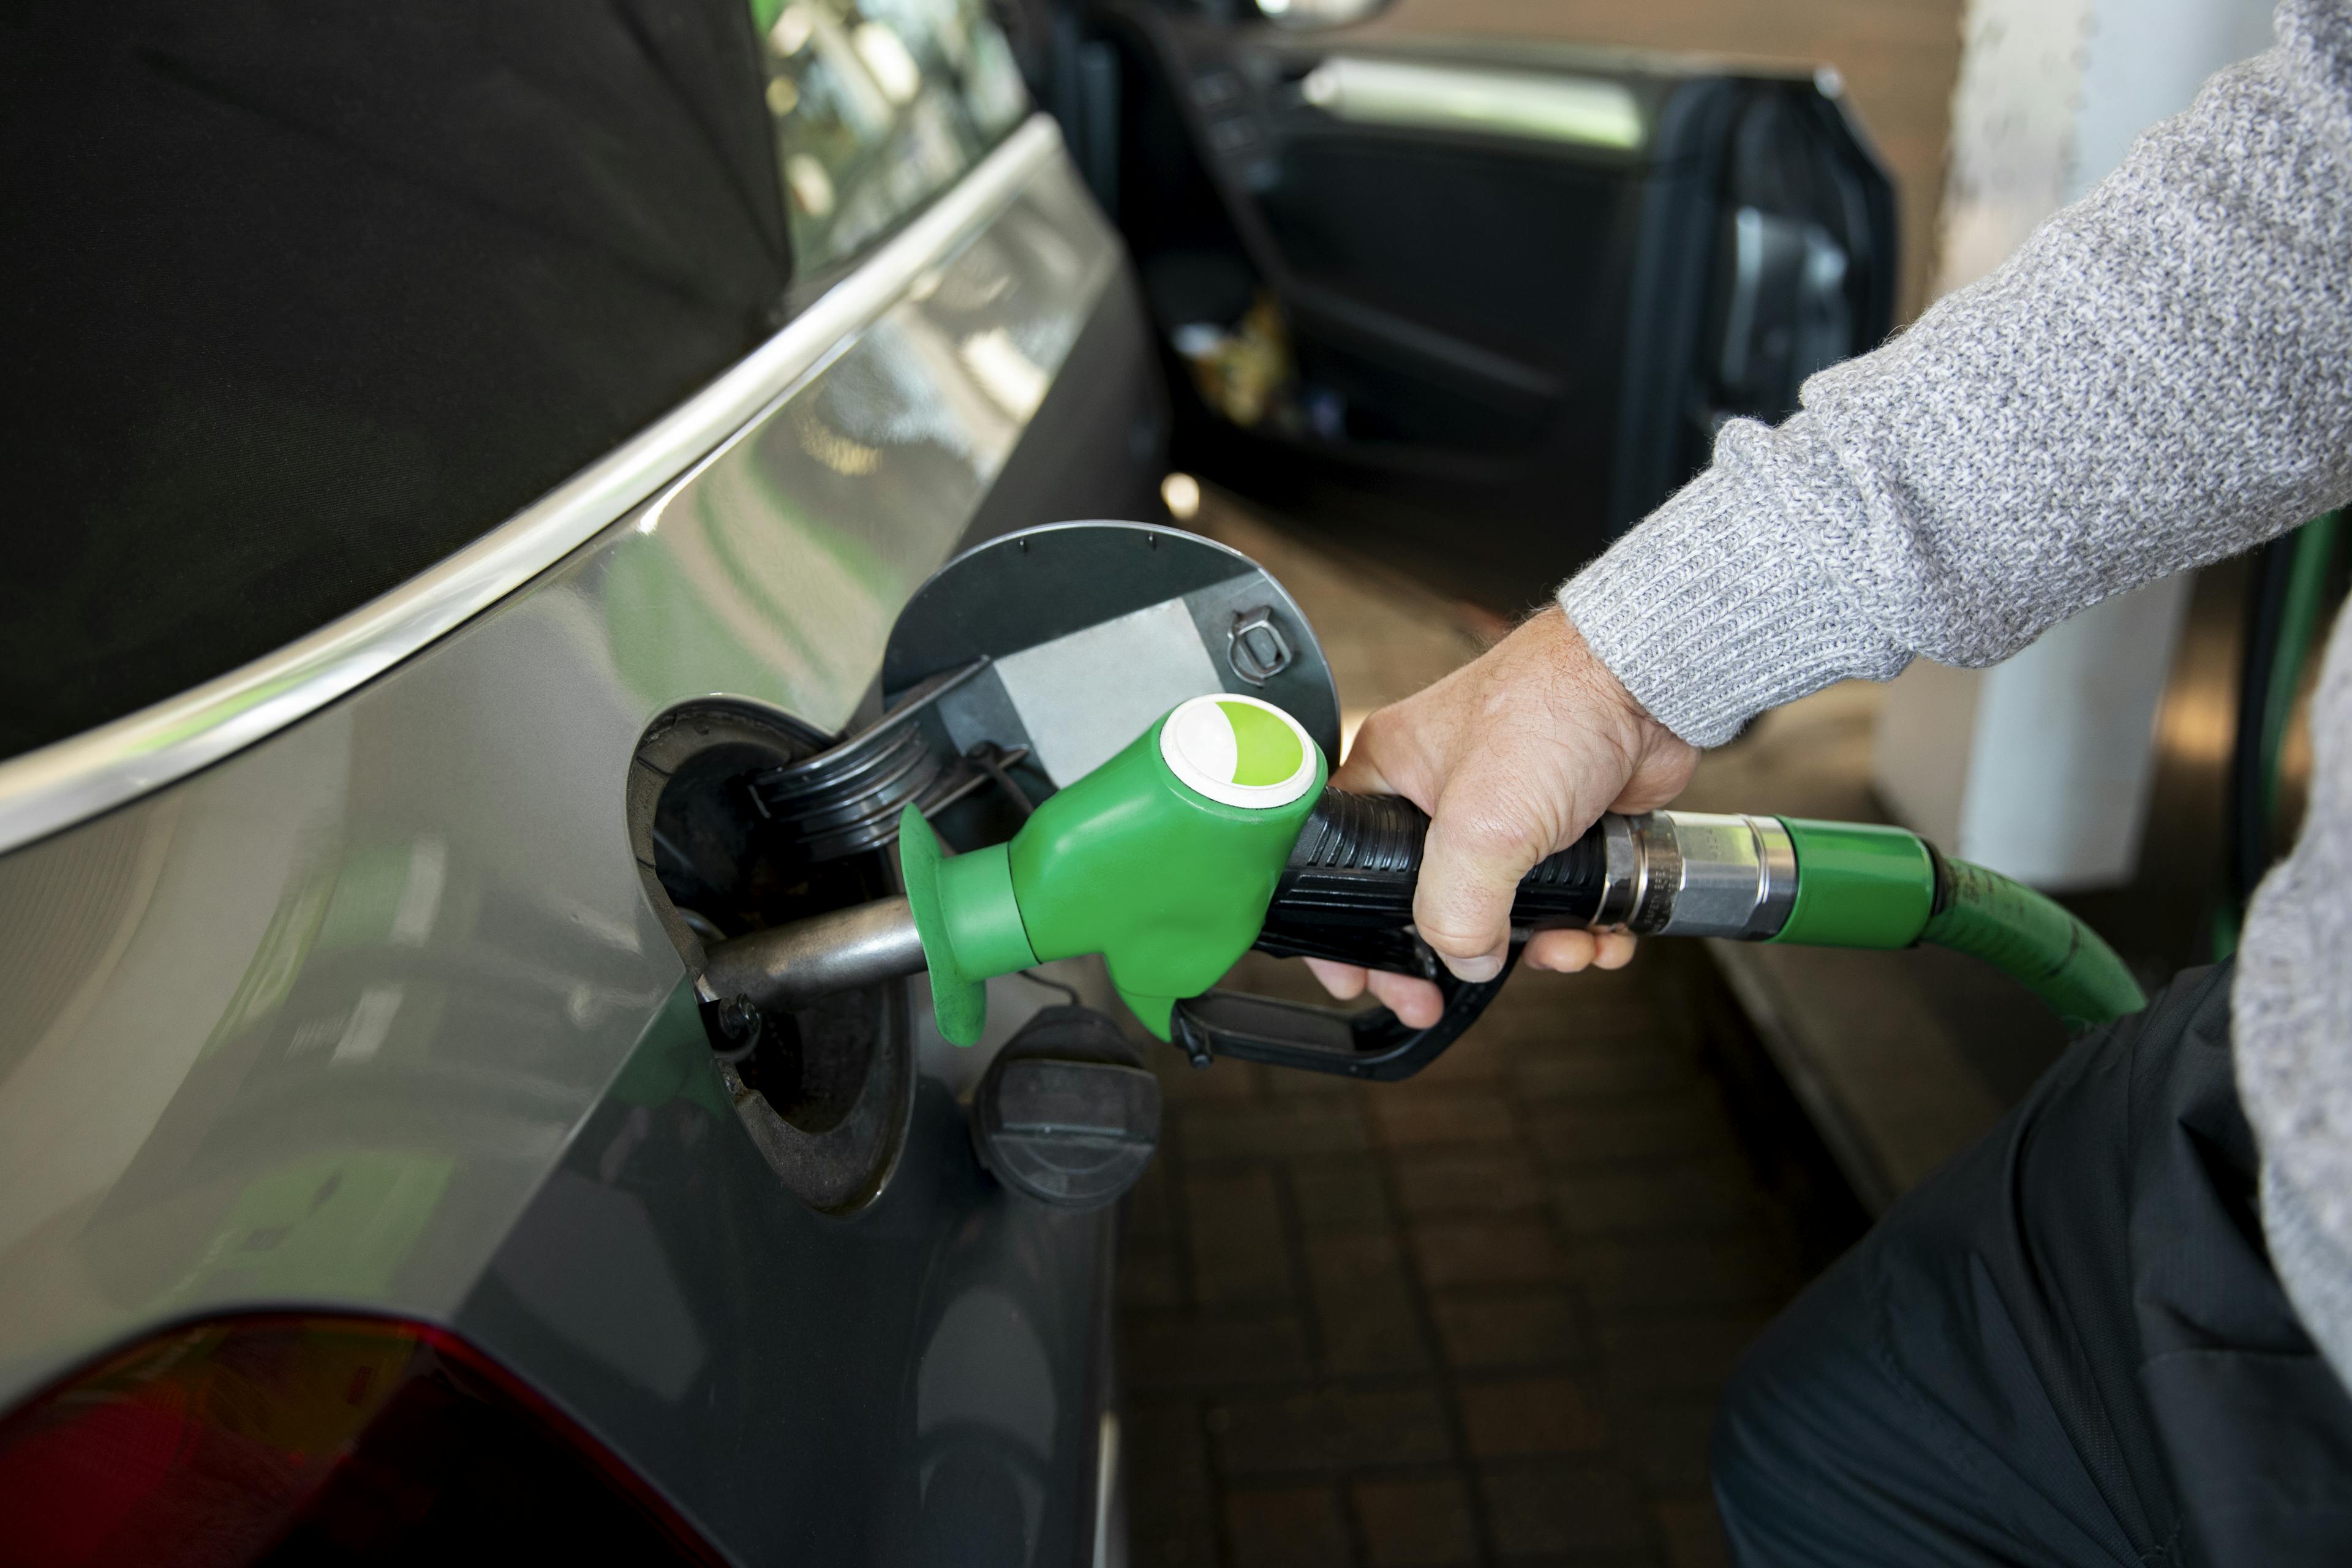 Use of biofuel (ethanol) in light vehicles